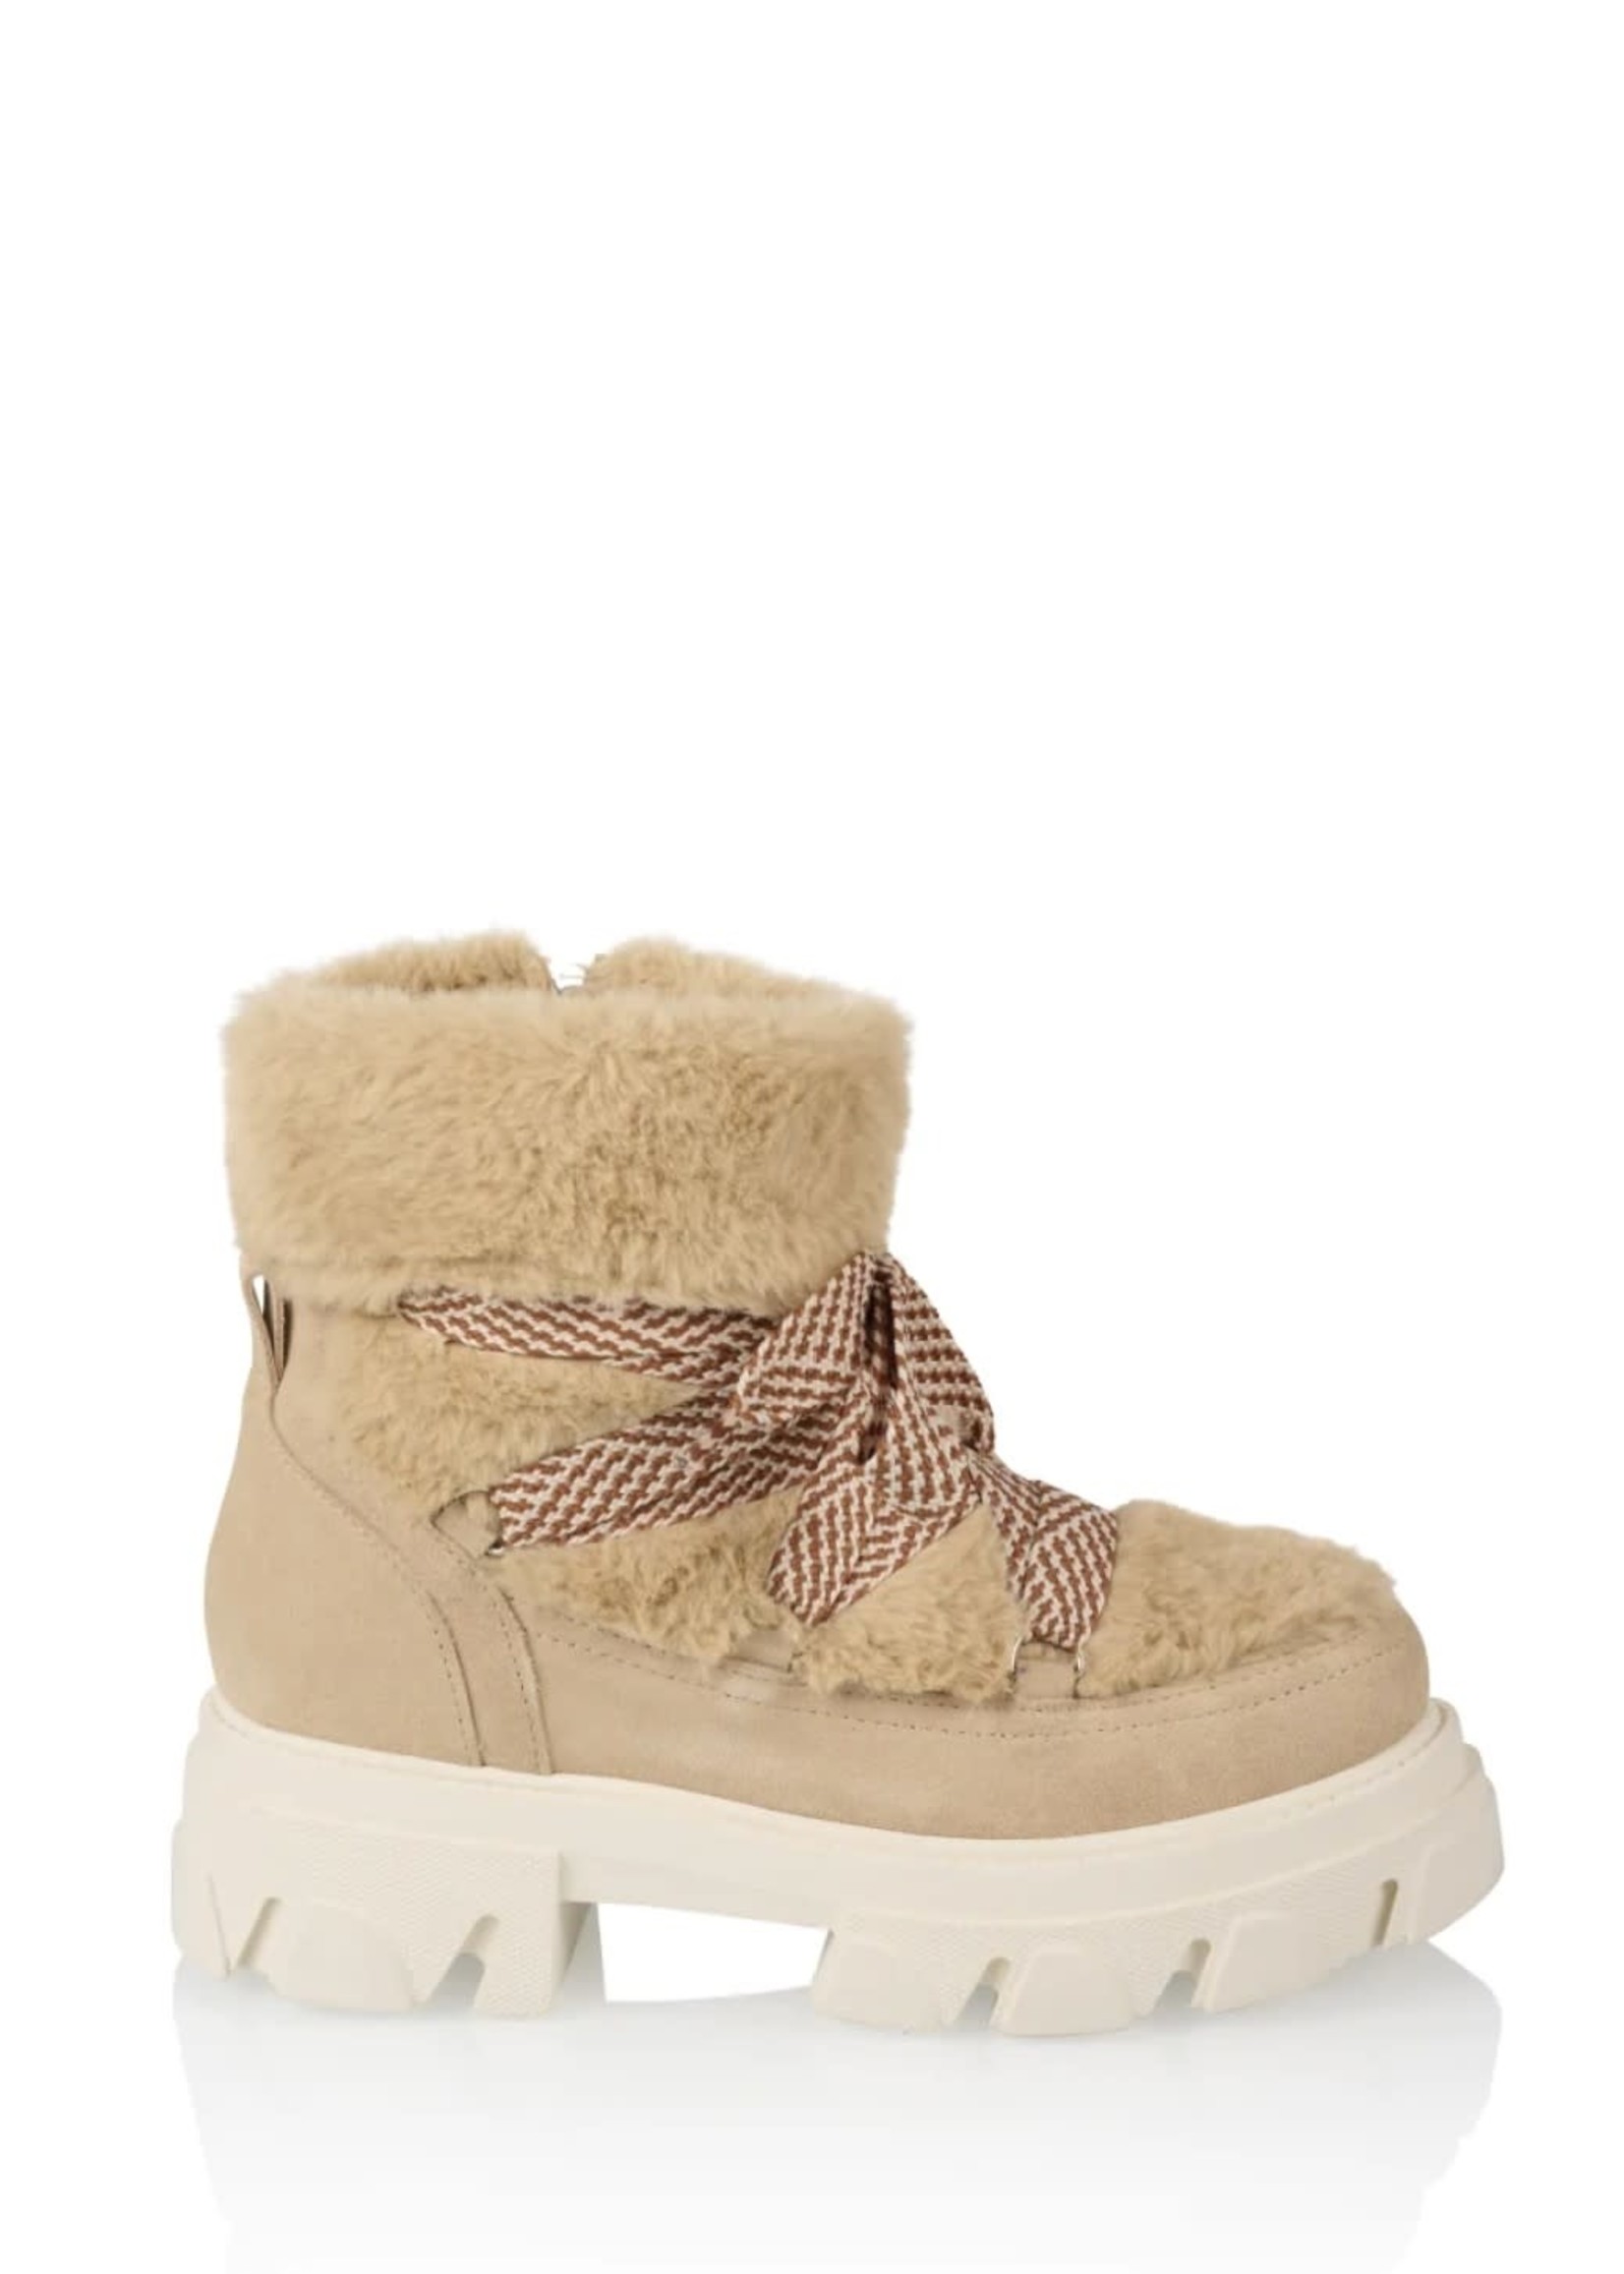 DWRS DWRS - Harbin Boots - White/Nude